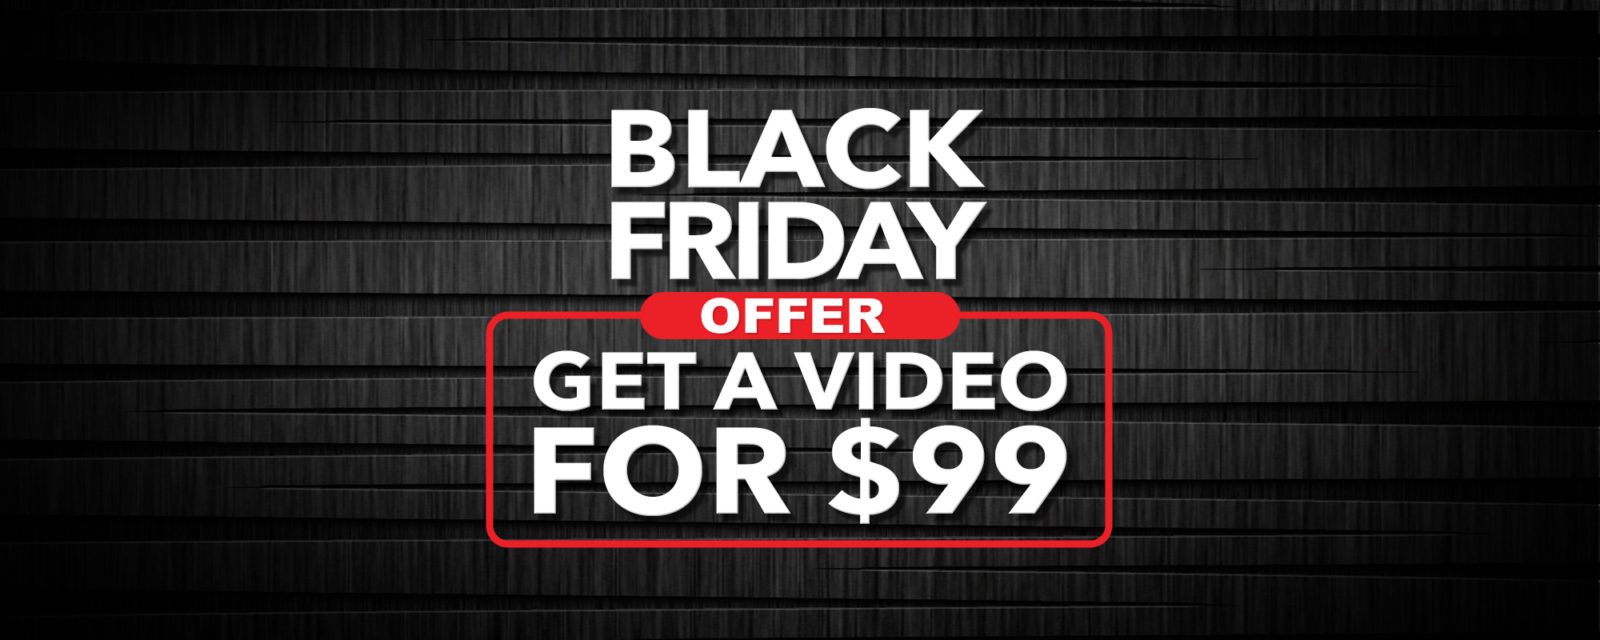 Get Your 99 Facebook Video For Black Friday ConsumerAcquisitioncom